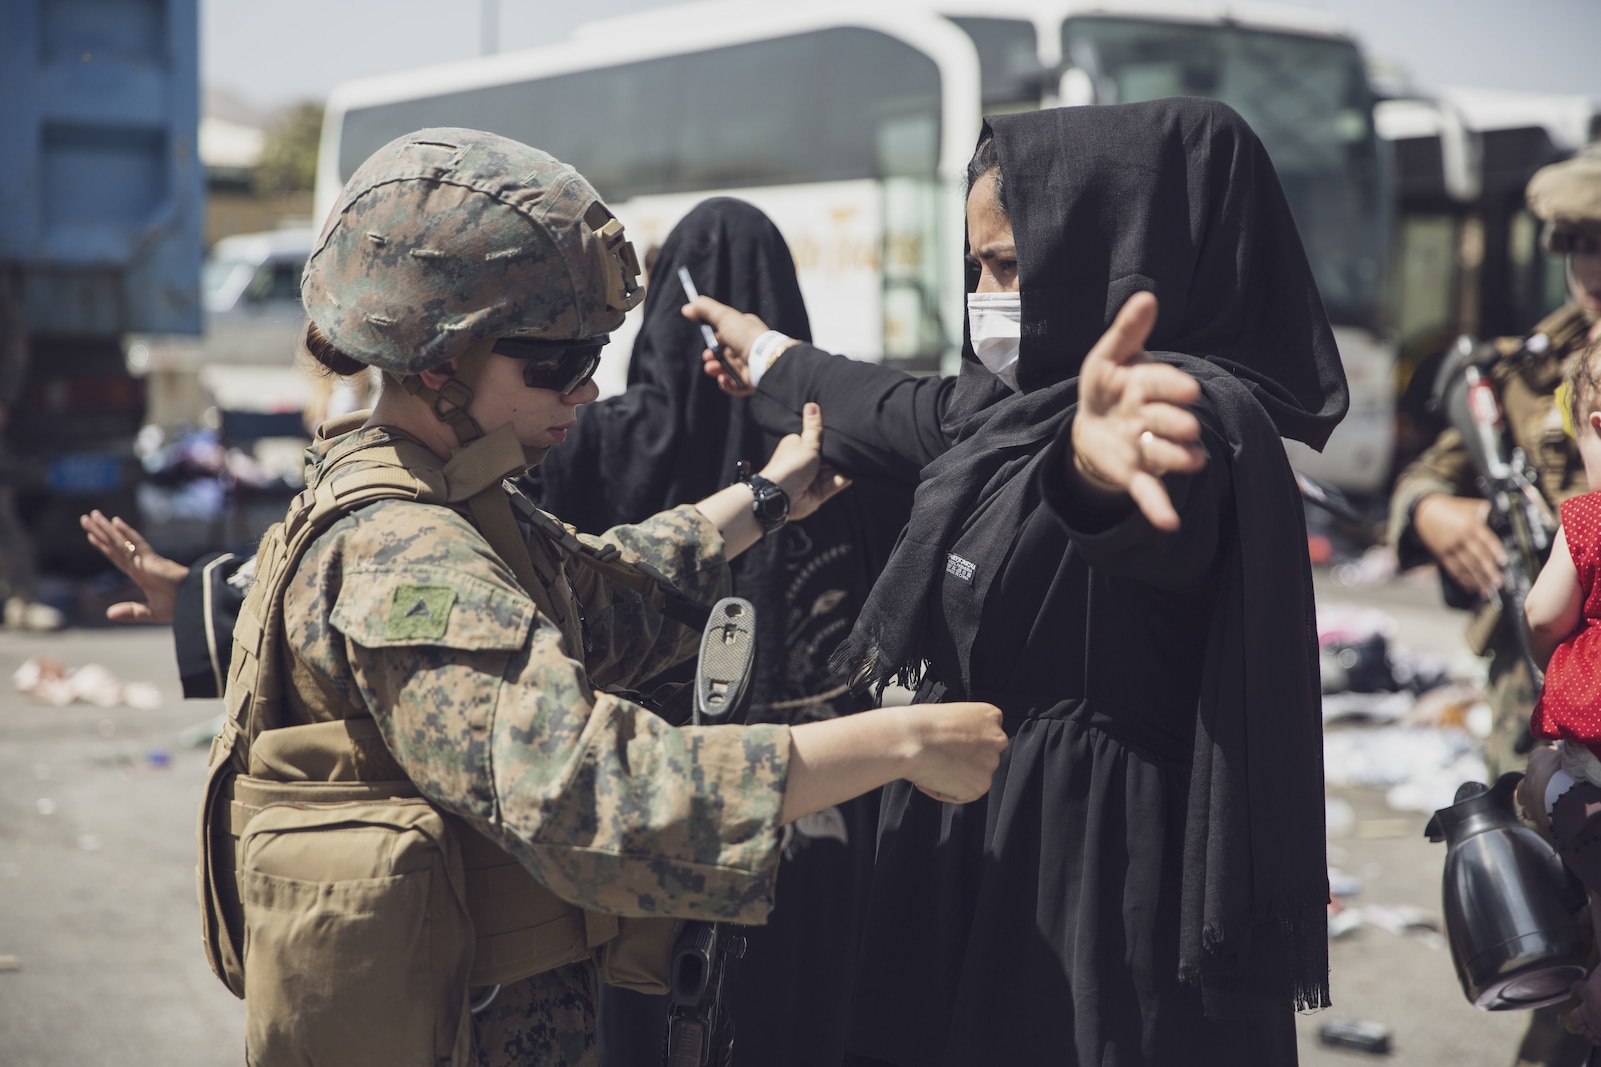 A U.S. Marine with the 24th Marine Expeditionary Unit (MEU) checks an Afghan woman as she goes through the Evacuation Control Center (ECC) during an evacuation at Hamid Karzai International Airport, Kabul, Afghanistan, Aug. 28. U.S. service members are assisting the Department of State with a non-combatant evacuation operation (NEO) in Afghanistan. (U.S. Marine Corps photo by Staff Sgt. Victor Mancilla)